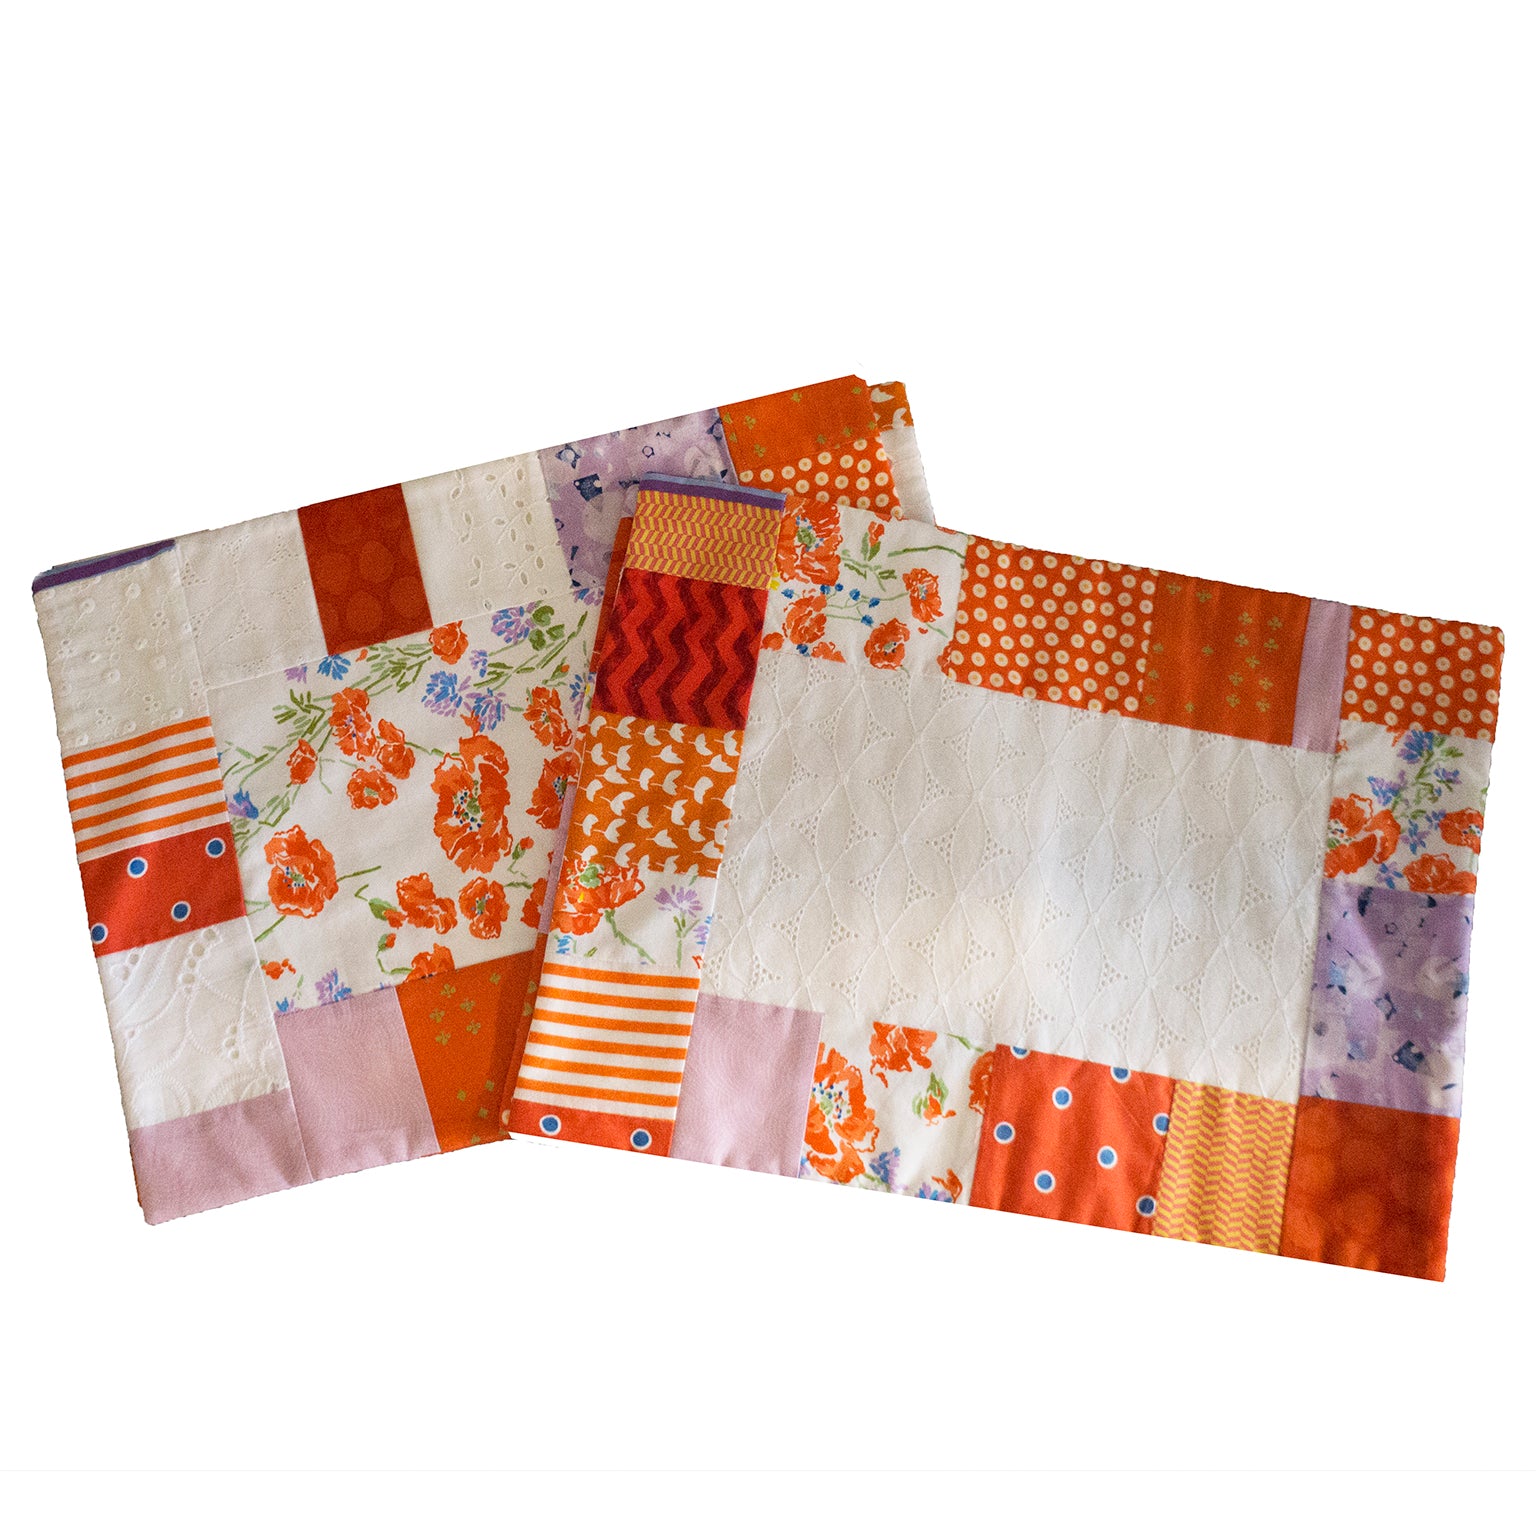 Patchwork Placemats Featuring Porthault in Orange